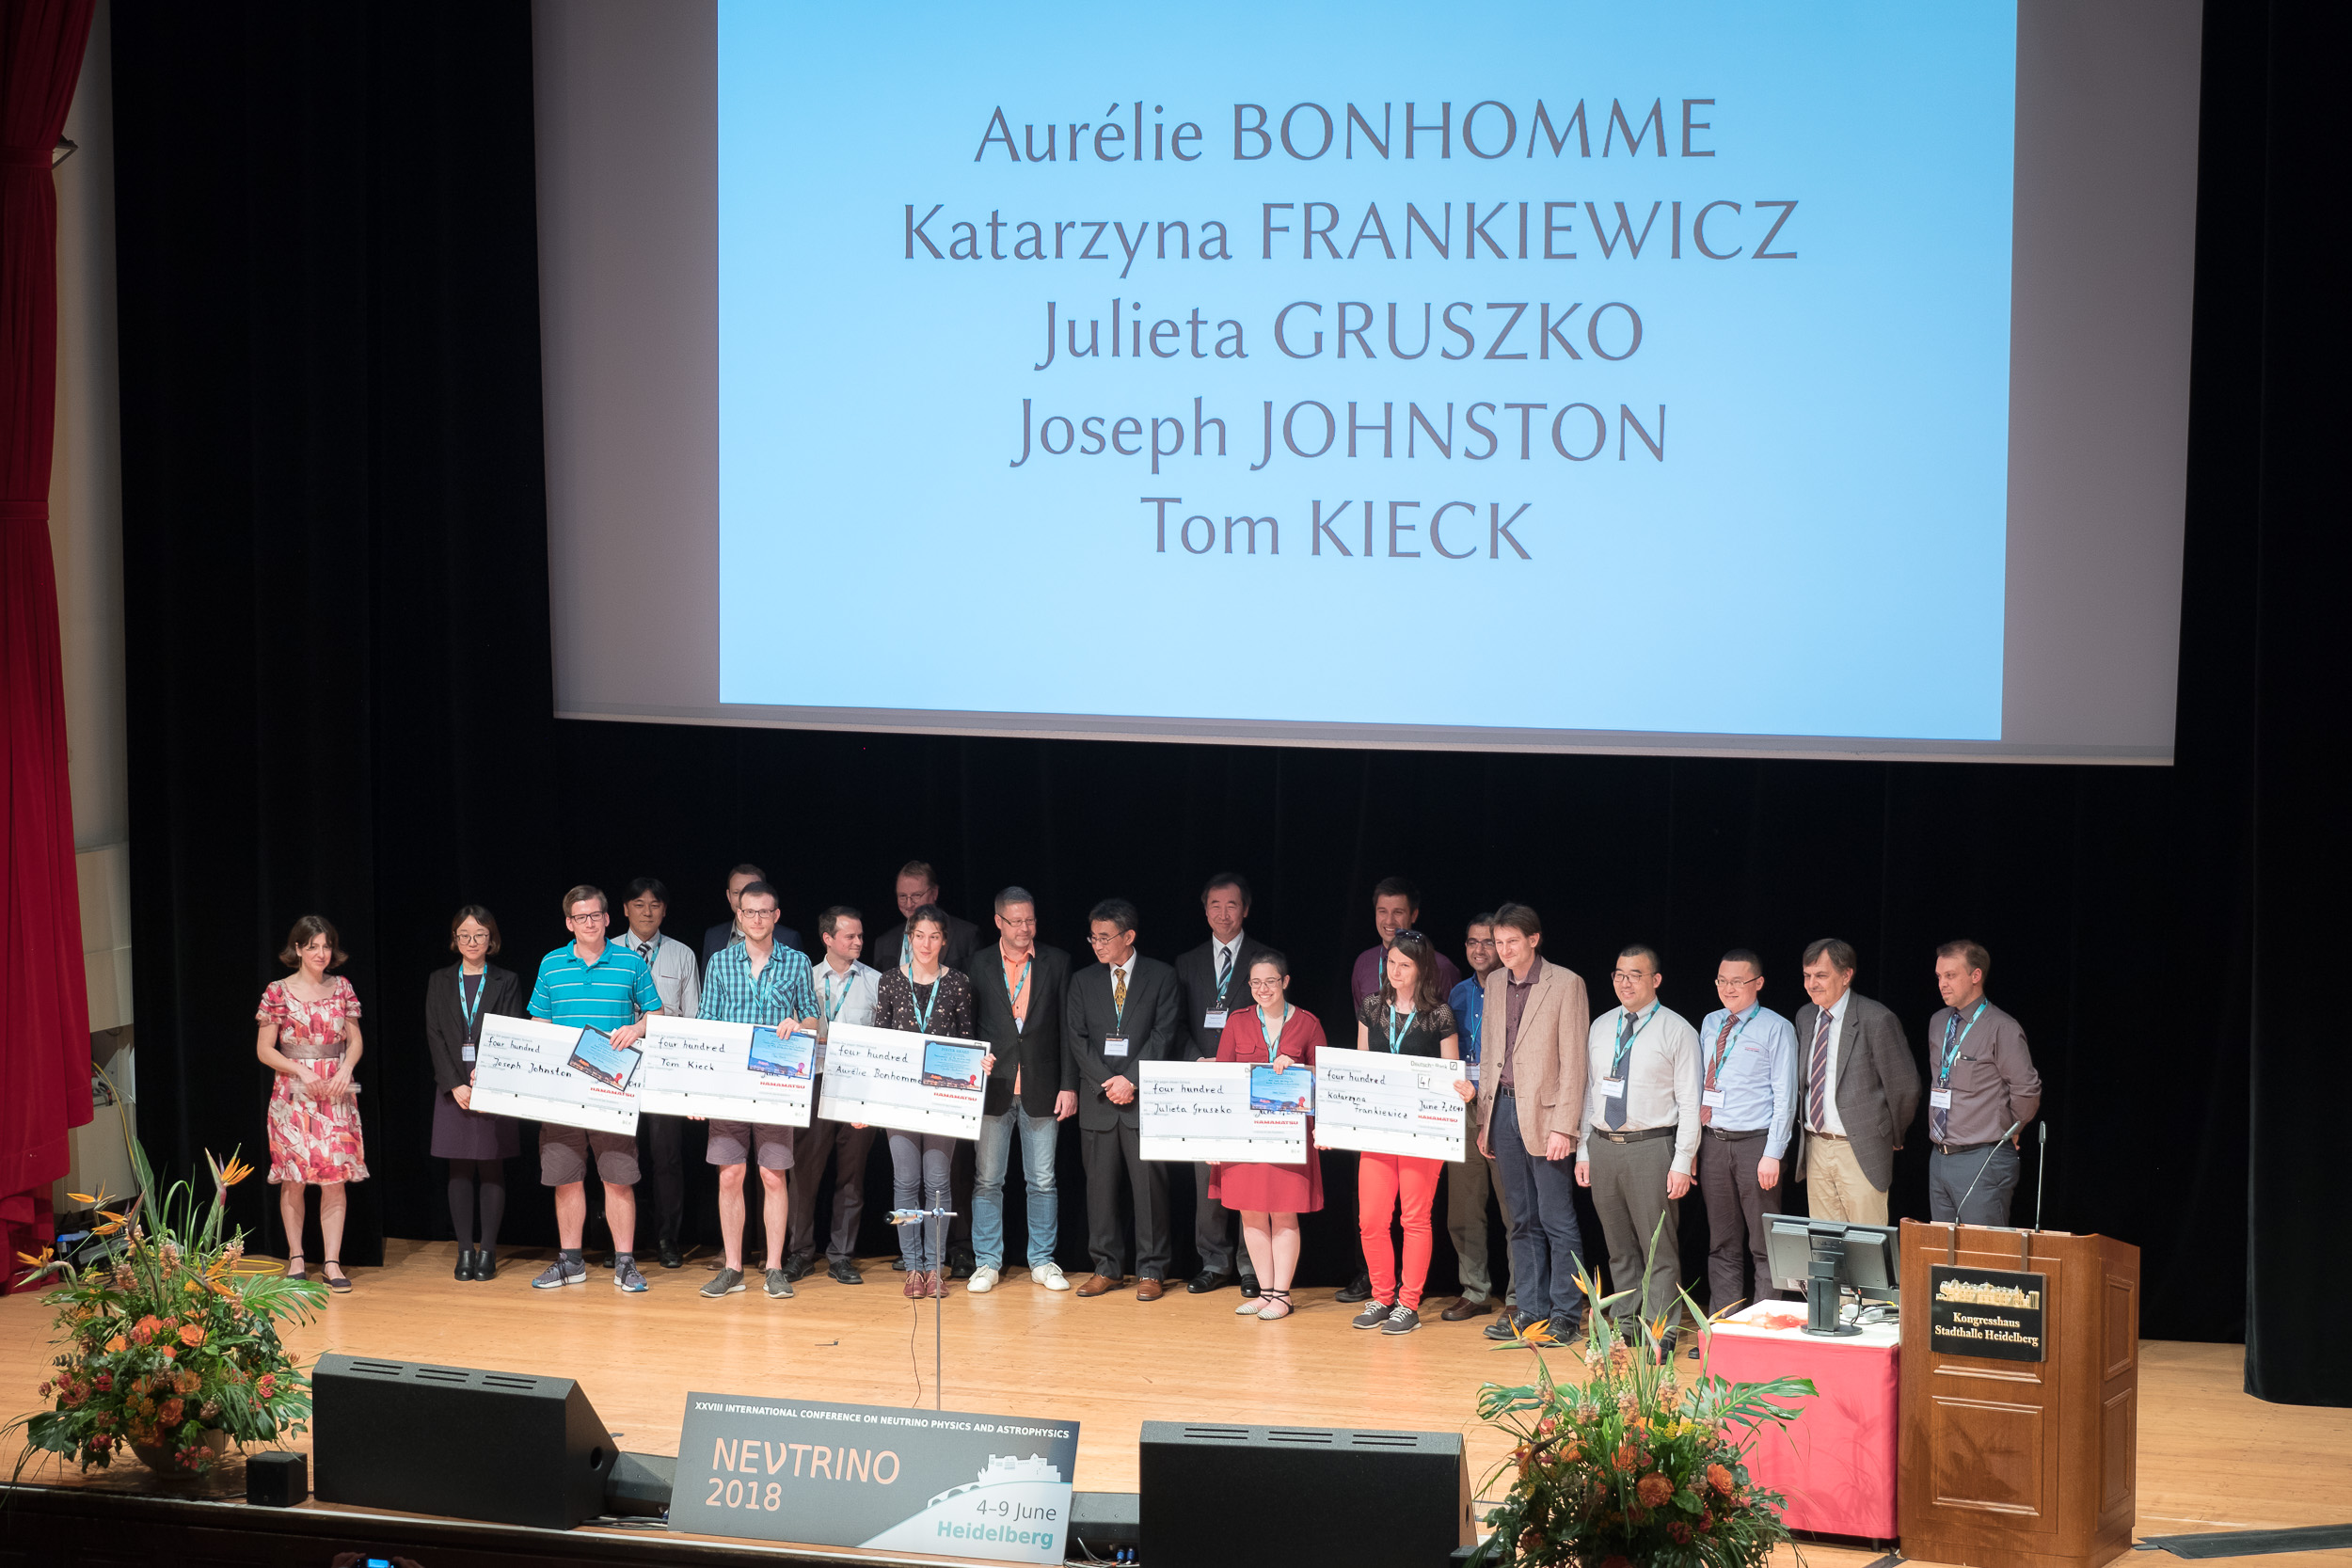 Posterprize winners at the Neutrino 2018 conference